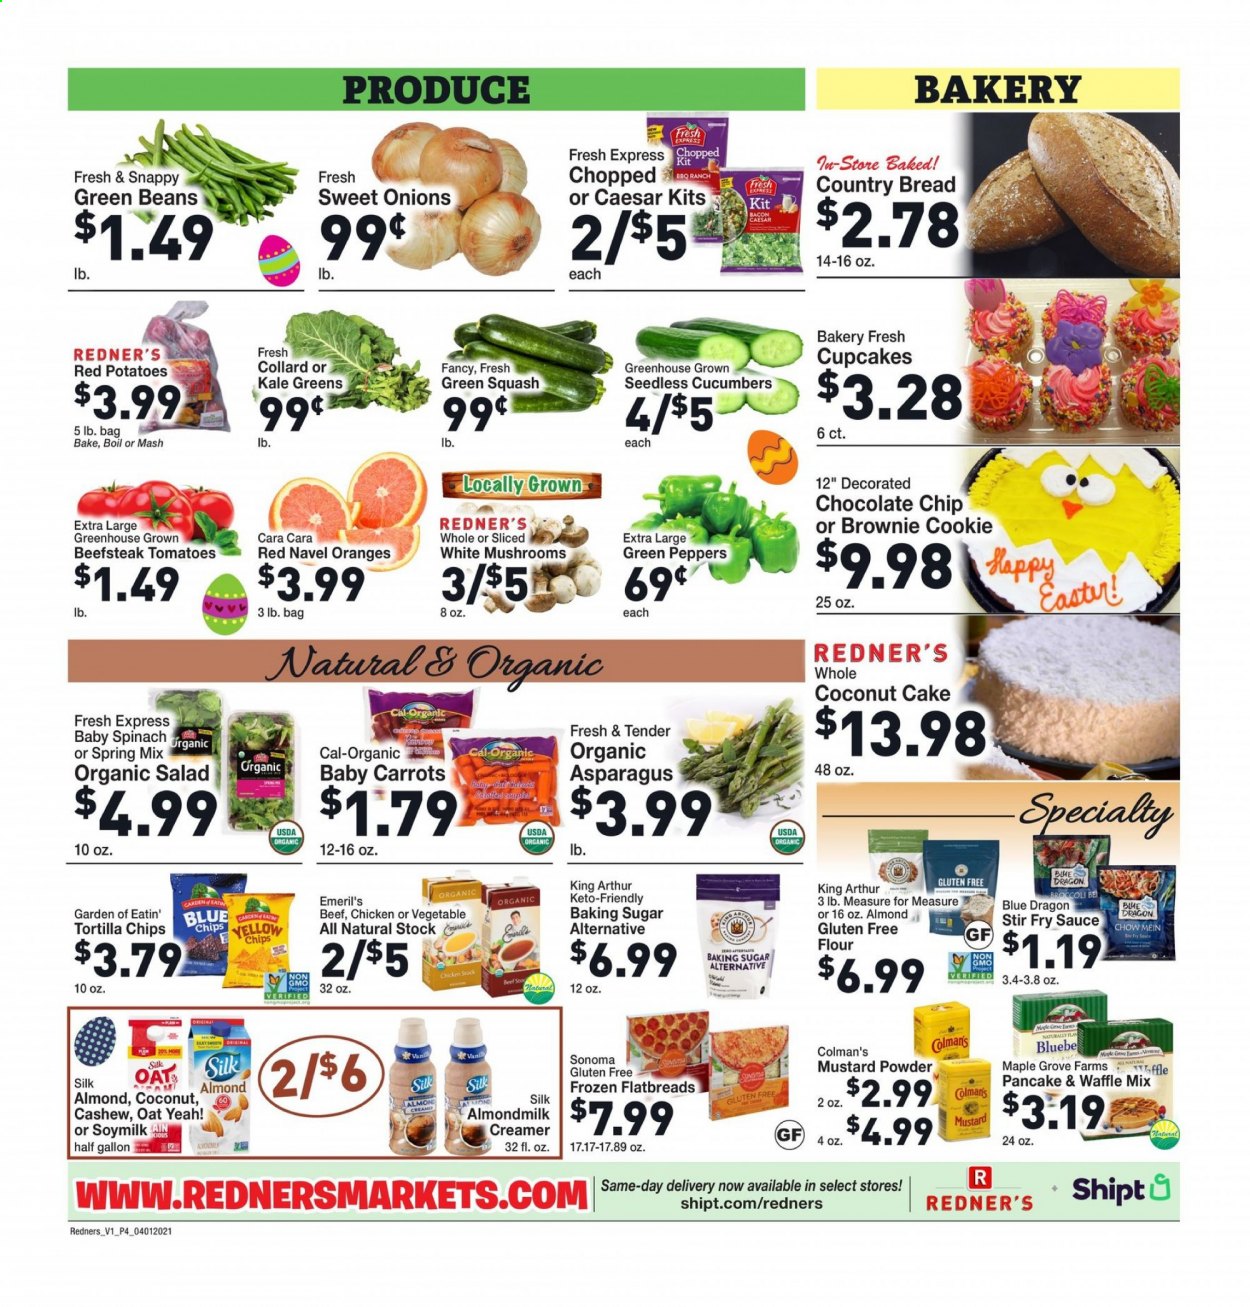 thumbnail - Redner's Markets Flyer - 04/01/2021 - 04/07/2021 - Sales products - mushrooms, collard greens, green beans, bread, cupcake, cake, brownies, pancakes, asparagus, beans, carrots, cucumber, tomatoes, salad, oranges, coconut, sauce, almond milk, soy milk, creamer, tortilla chips, flour, sugar, oats, mustard powder, mustard, cashews, kale, potatoes, peppers, red potatoes, navel oranges. Page 6.